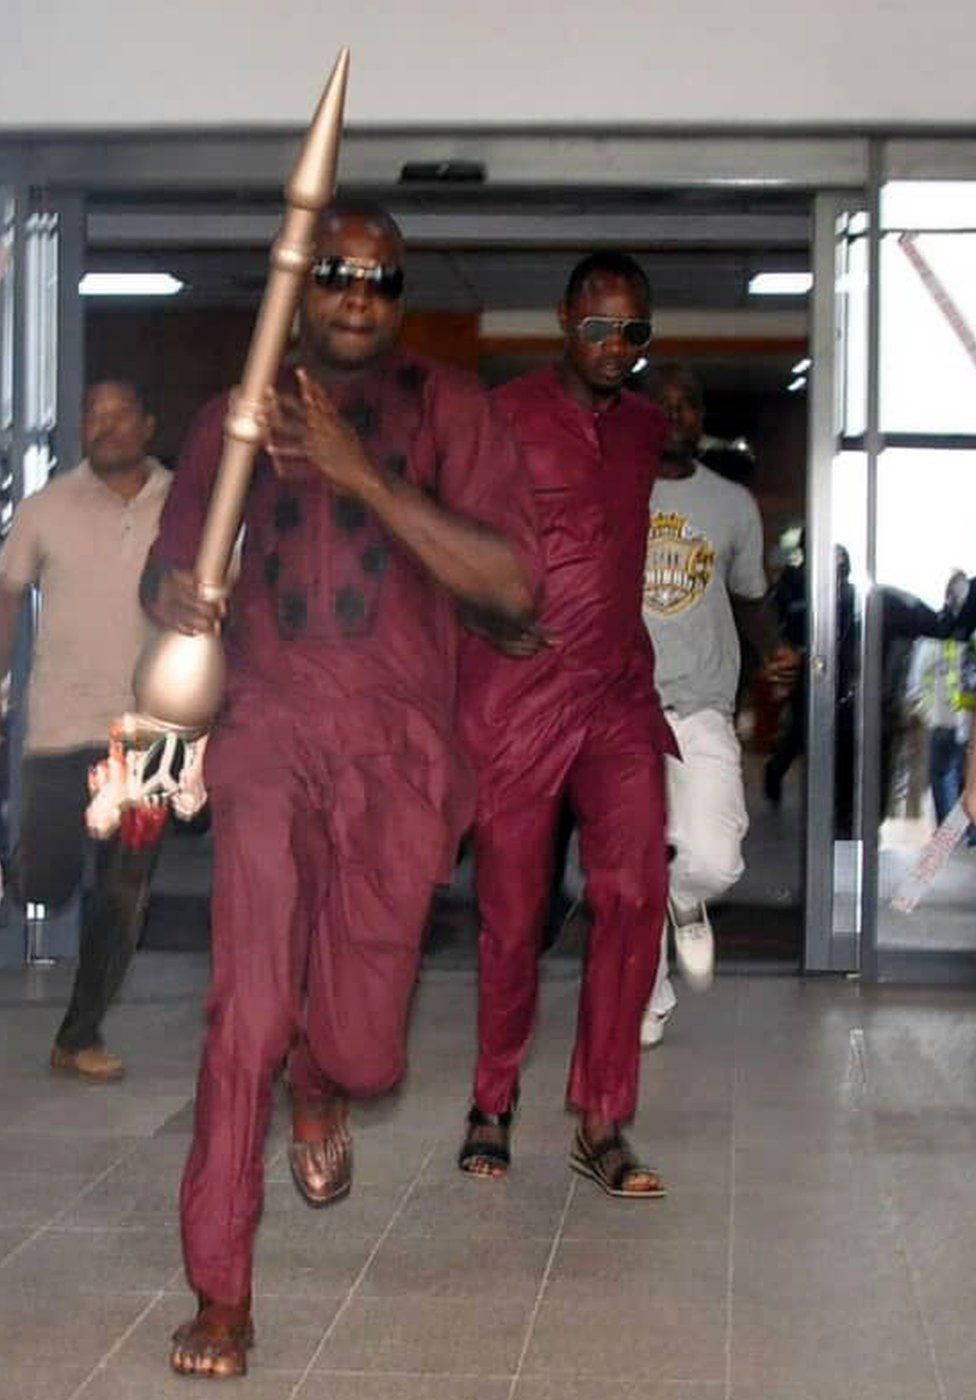 A man runs holding mace, the symbol of authority of the Upper Legislative Chamber, seized at the chamber in Abuja, on April 18, 2018. The ceremonial mace of Nigeria's upper chamber of parliament was stolen Senate leaders said, condemning the theft as an 'act of treason'.